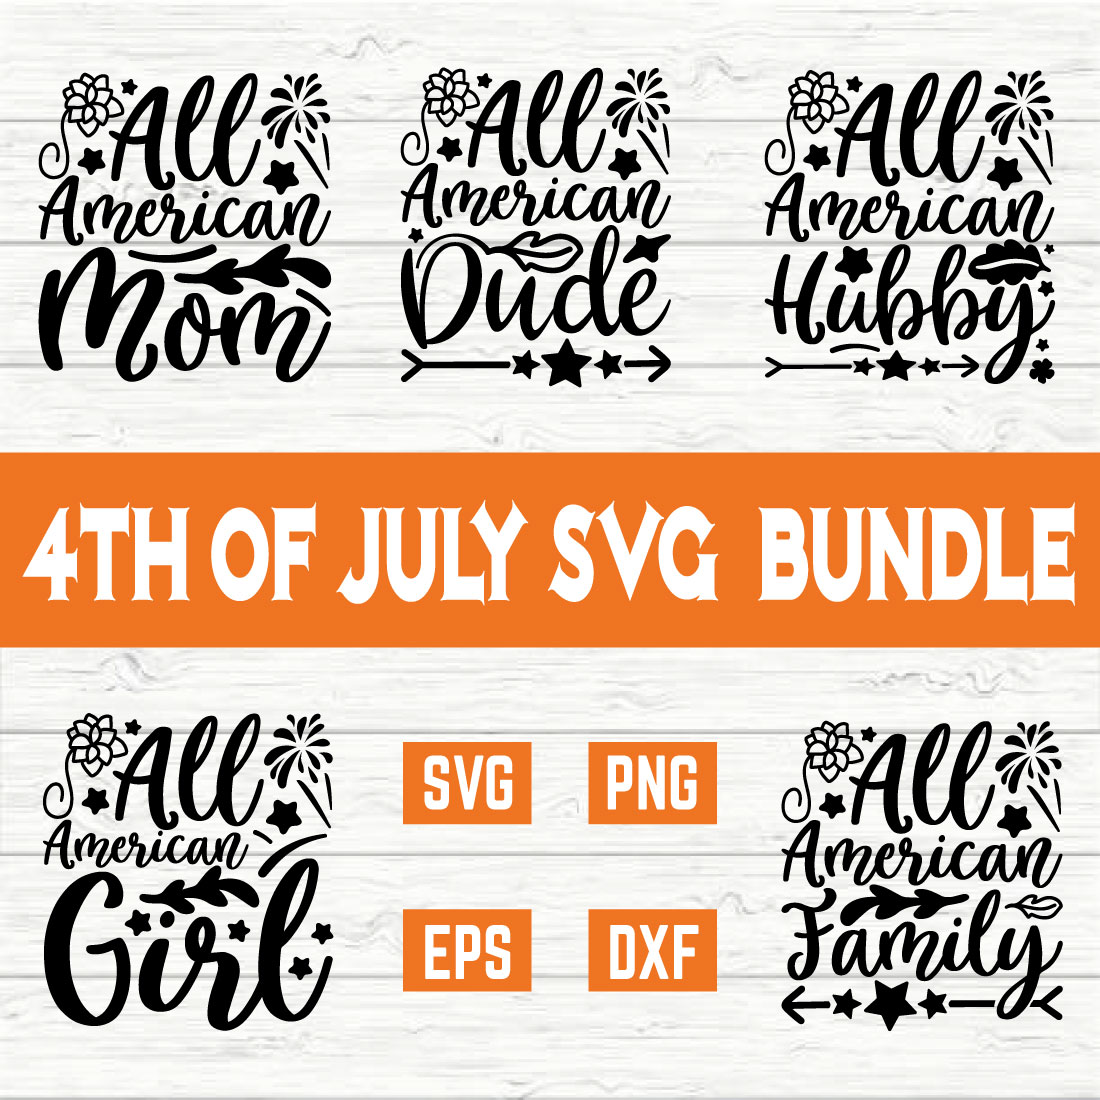 4th Of July T shirt Bundle Vol 2 cover image.